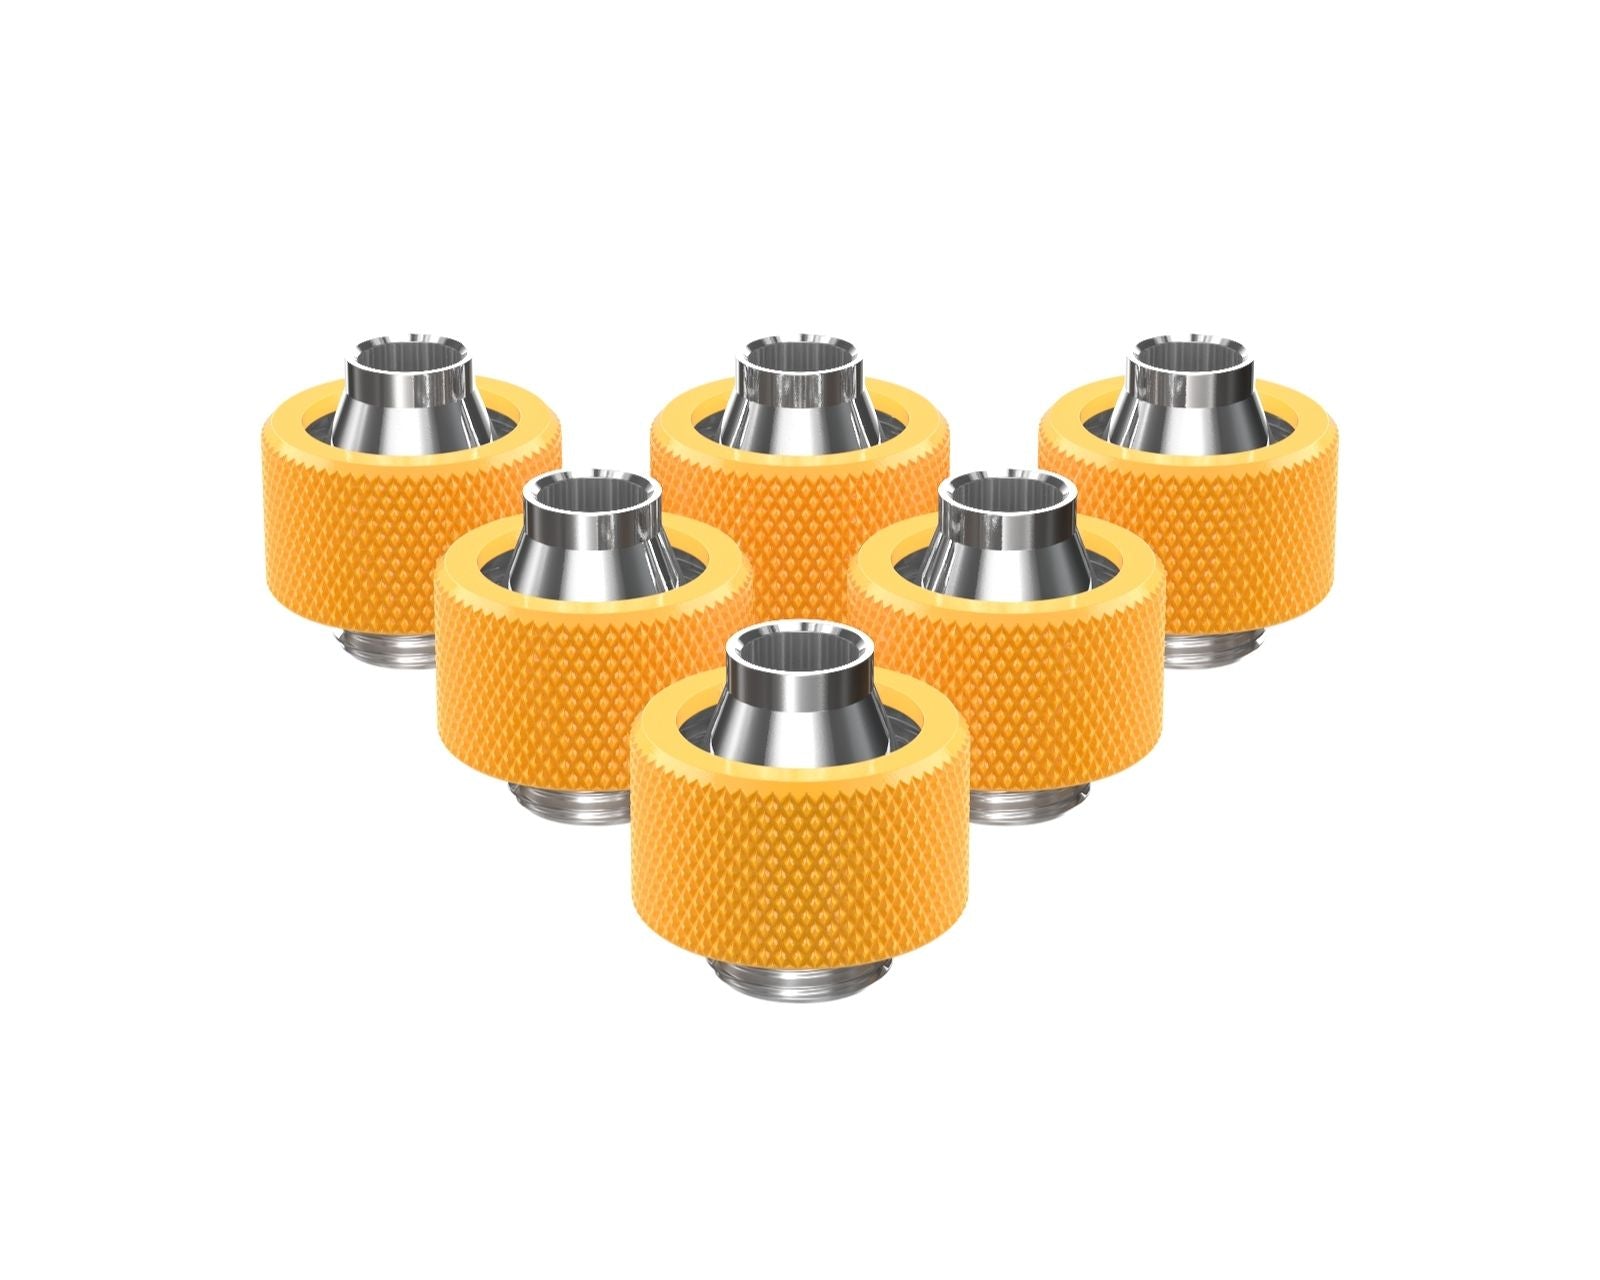 PrimoChill SecureFit SX - Premium Compression Fitting For 3/8in ID x 5/8in OD Flexible Tubing 6 Pack (F-SFSX58-6) - Available in 20+ Colors, Custom Watercooling Loop Ready - Yellow